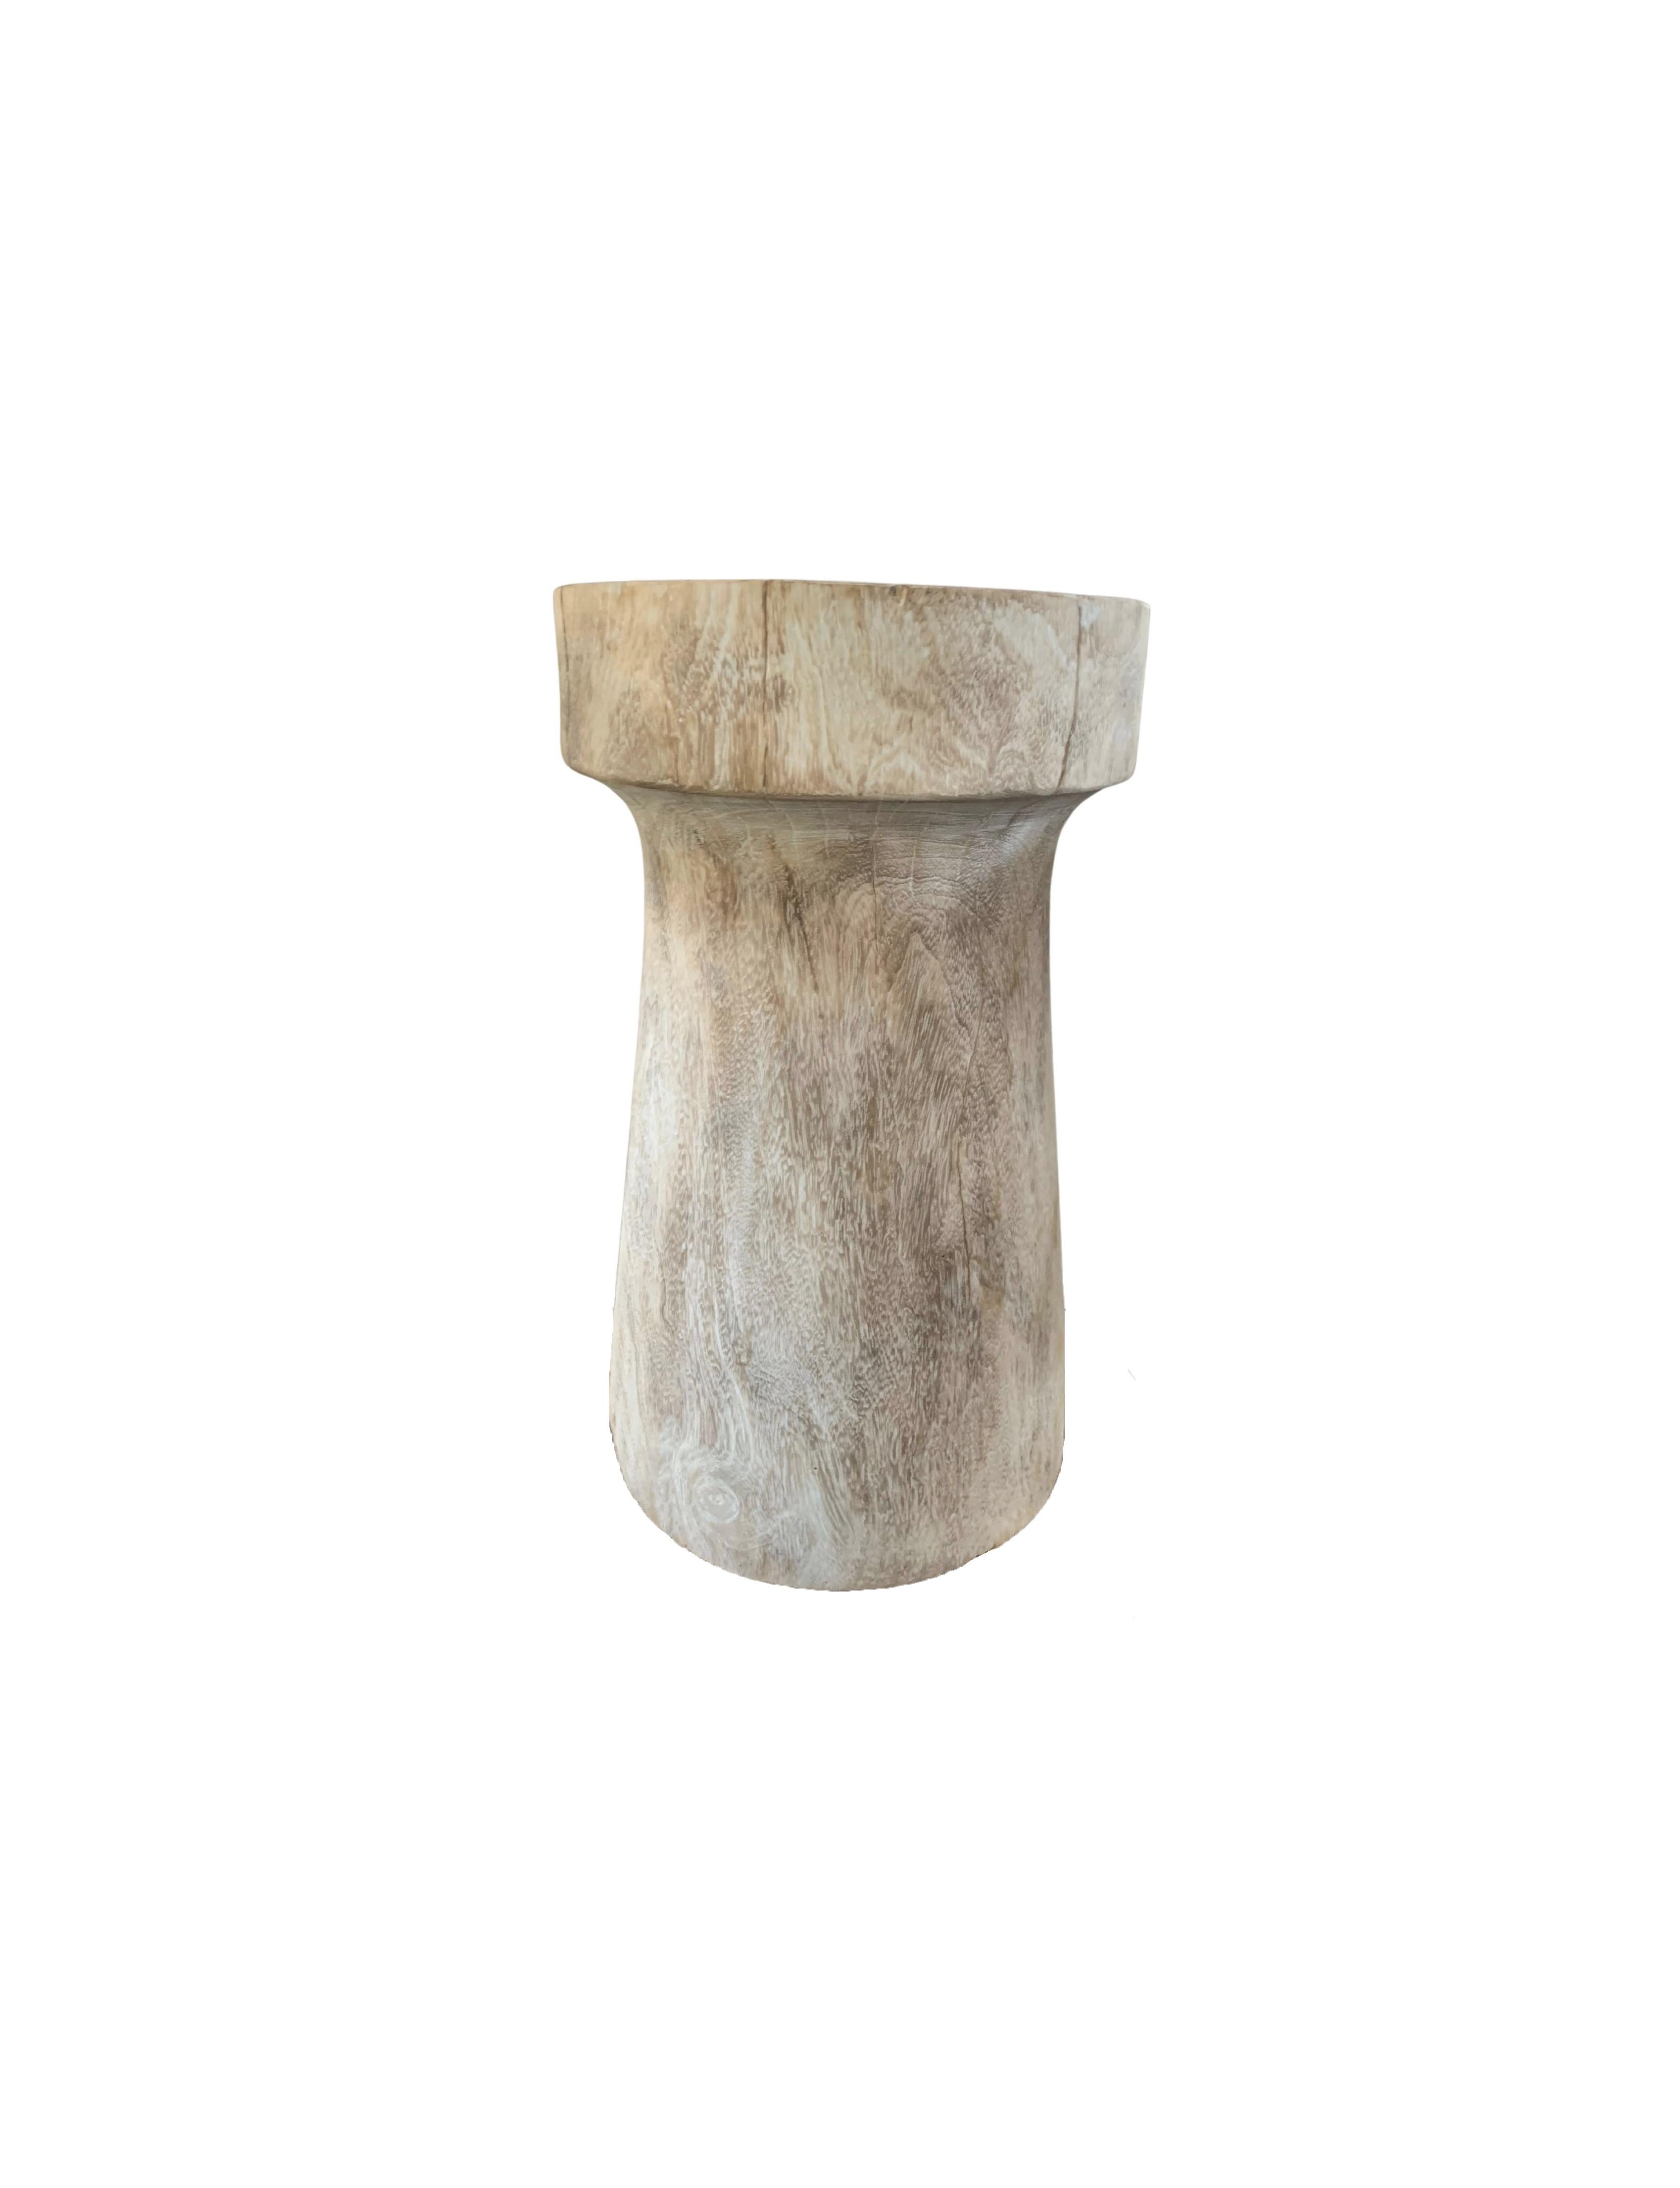 Organic Modern Sculptural Side Table Crafted from Mango Wood, Bleached Finish For Sale